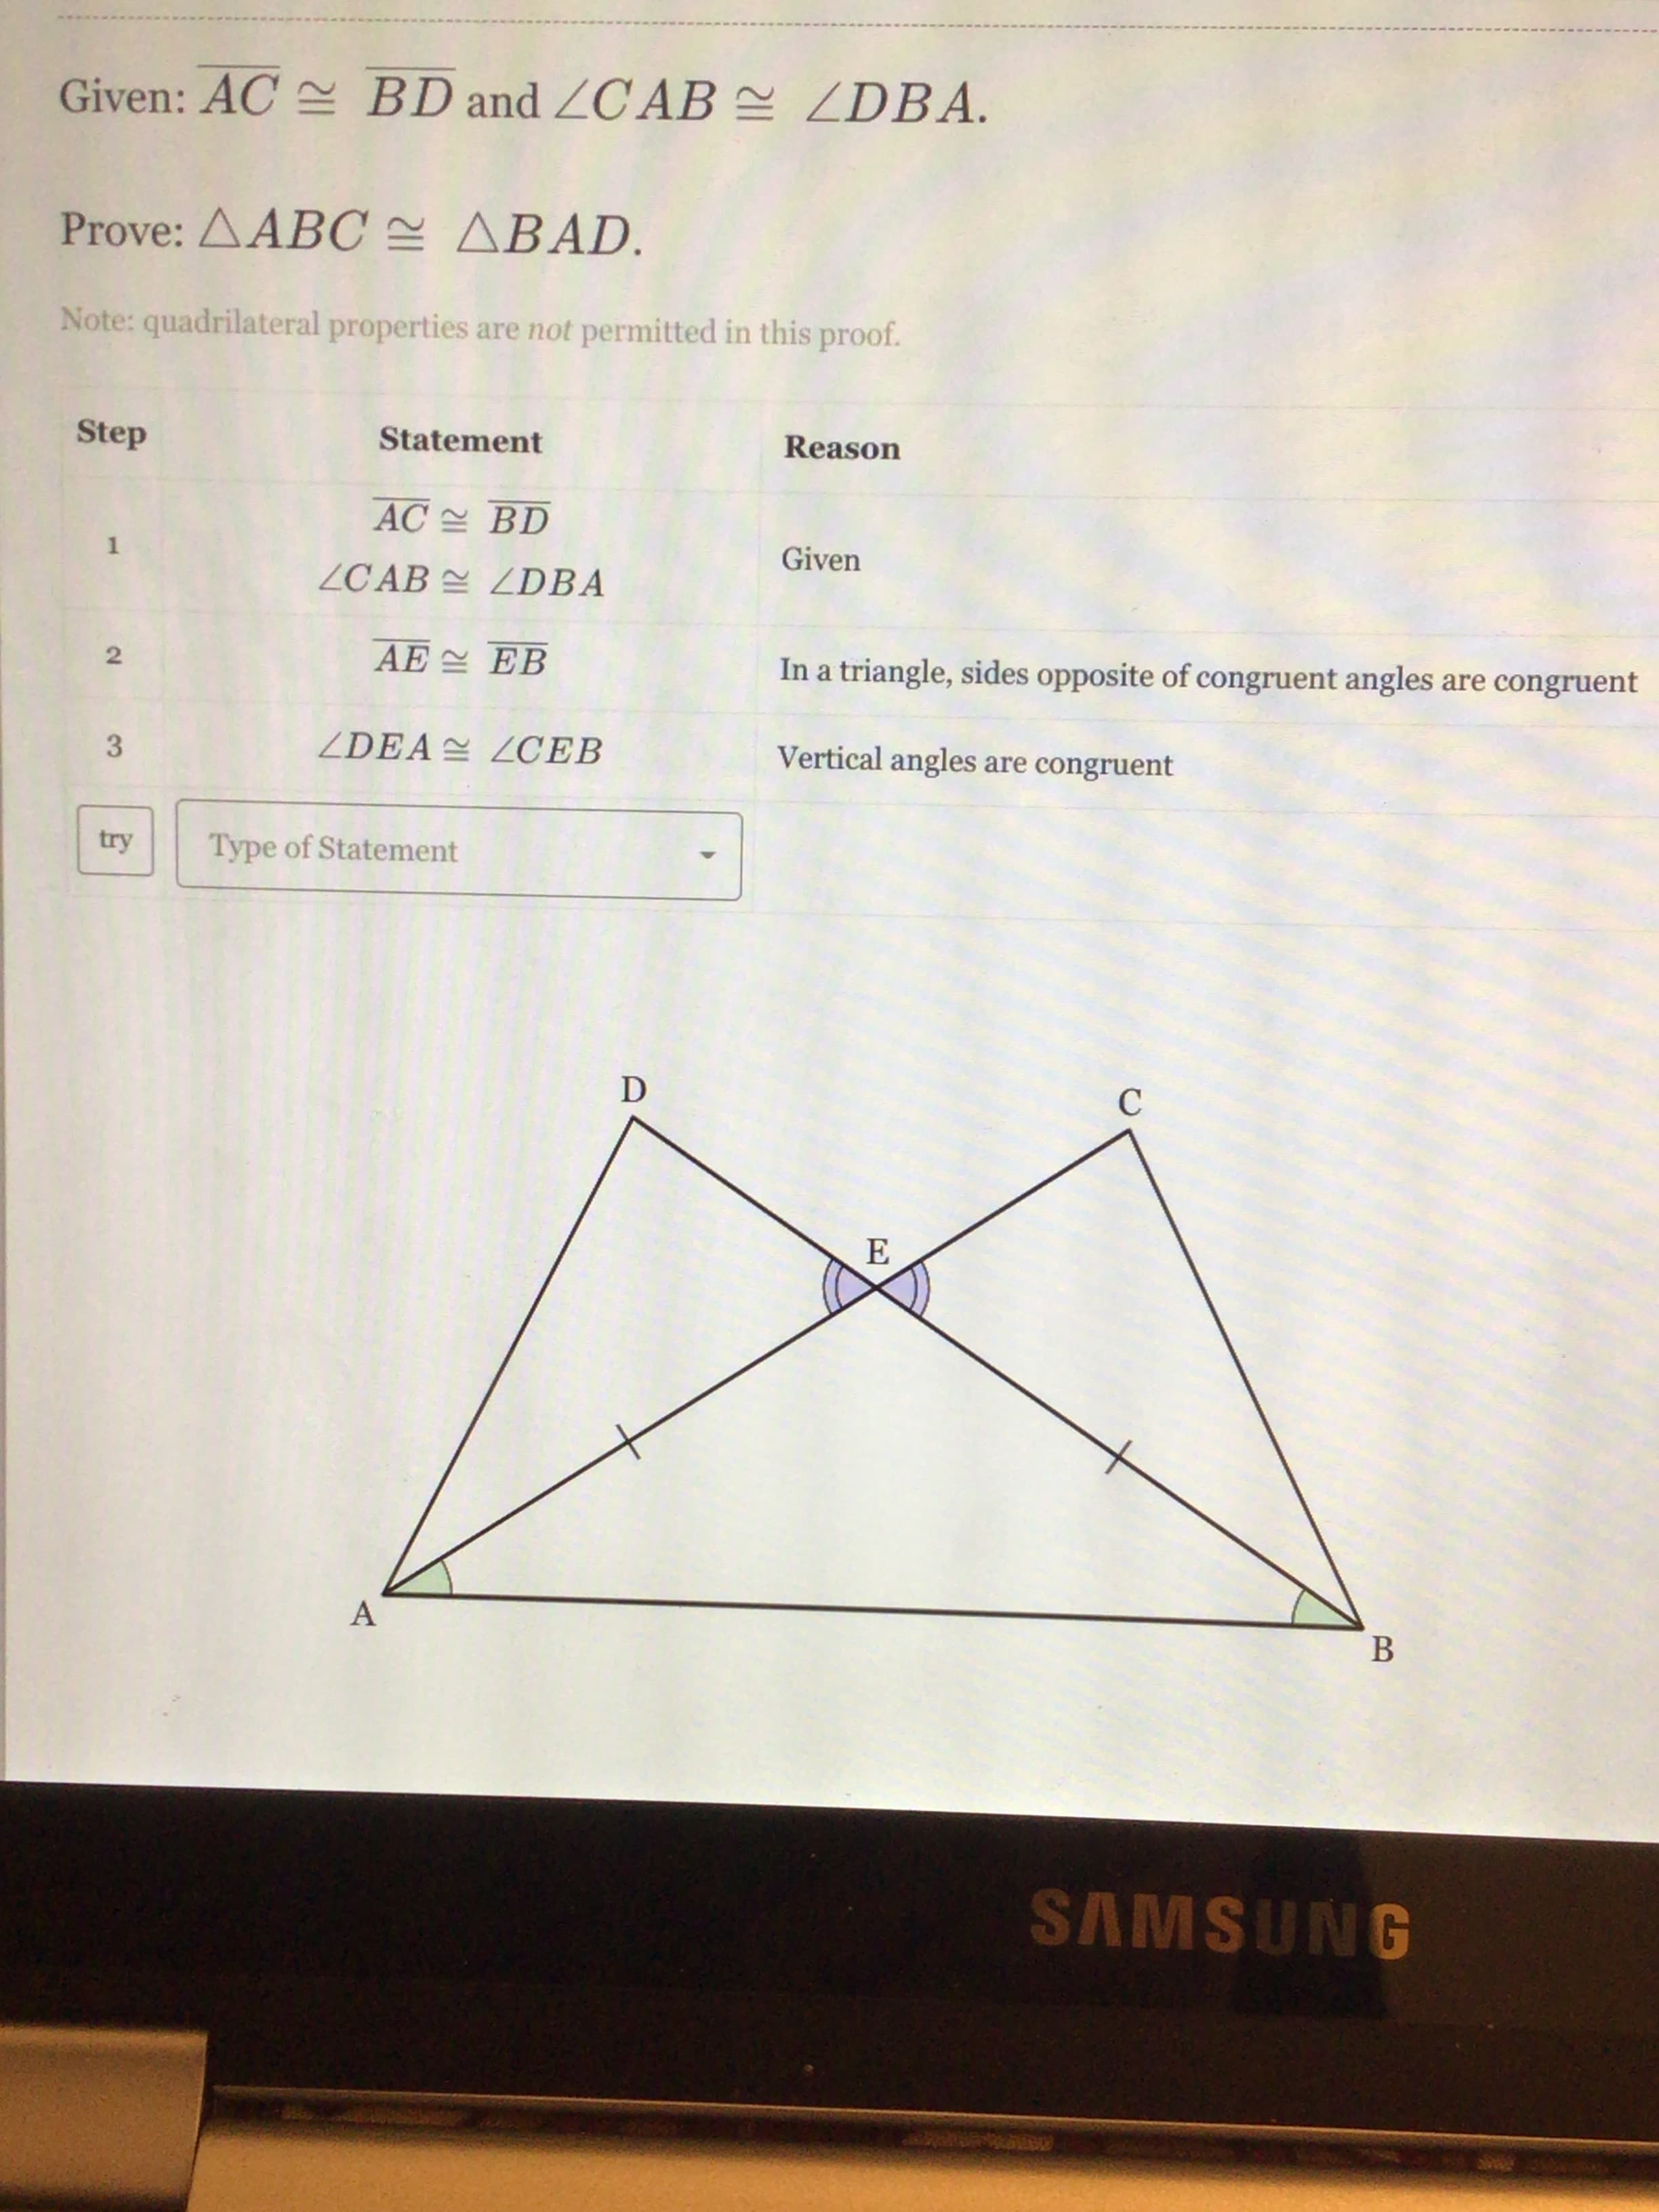 Given: AC BD and ZC AB = ZDBA.
Prove: ΔΑBC ΔΒAD.
Note: quadrilateral properties are not permitted in this proof.
Step
Statement
Reason
AC BD
1
Given
ZCAB ZDBA
AE EB
In a triangle, sides opposite of congruent angles are congru
ZDEA LCEB
Vertical angles are congruent
try
Type of Statement
D
E
A
В
2.
